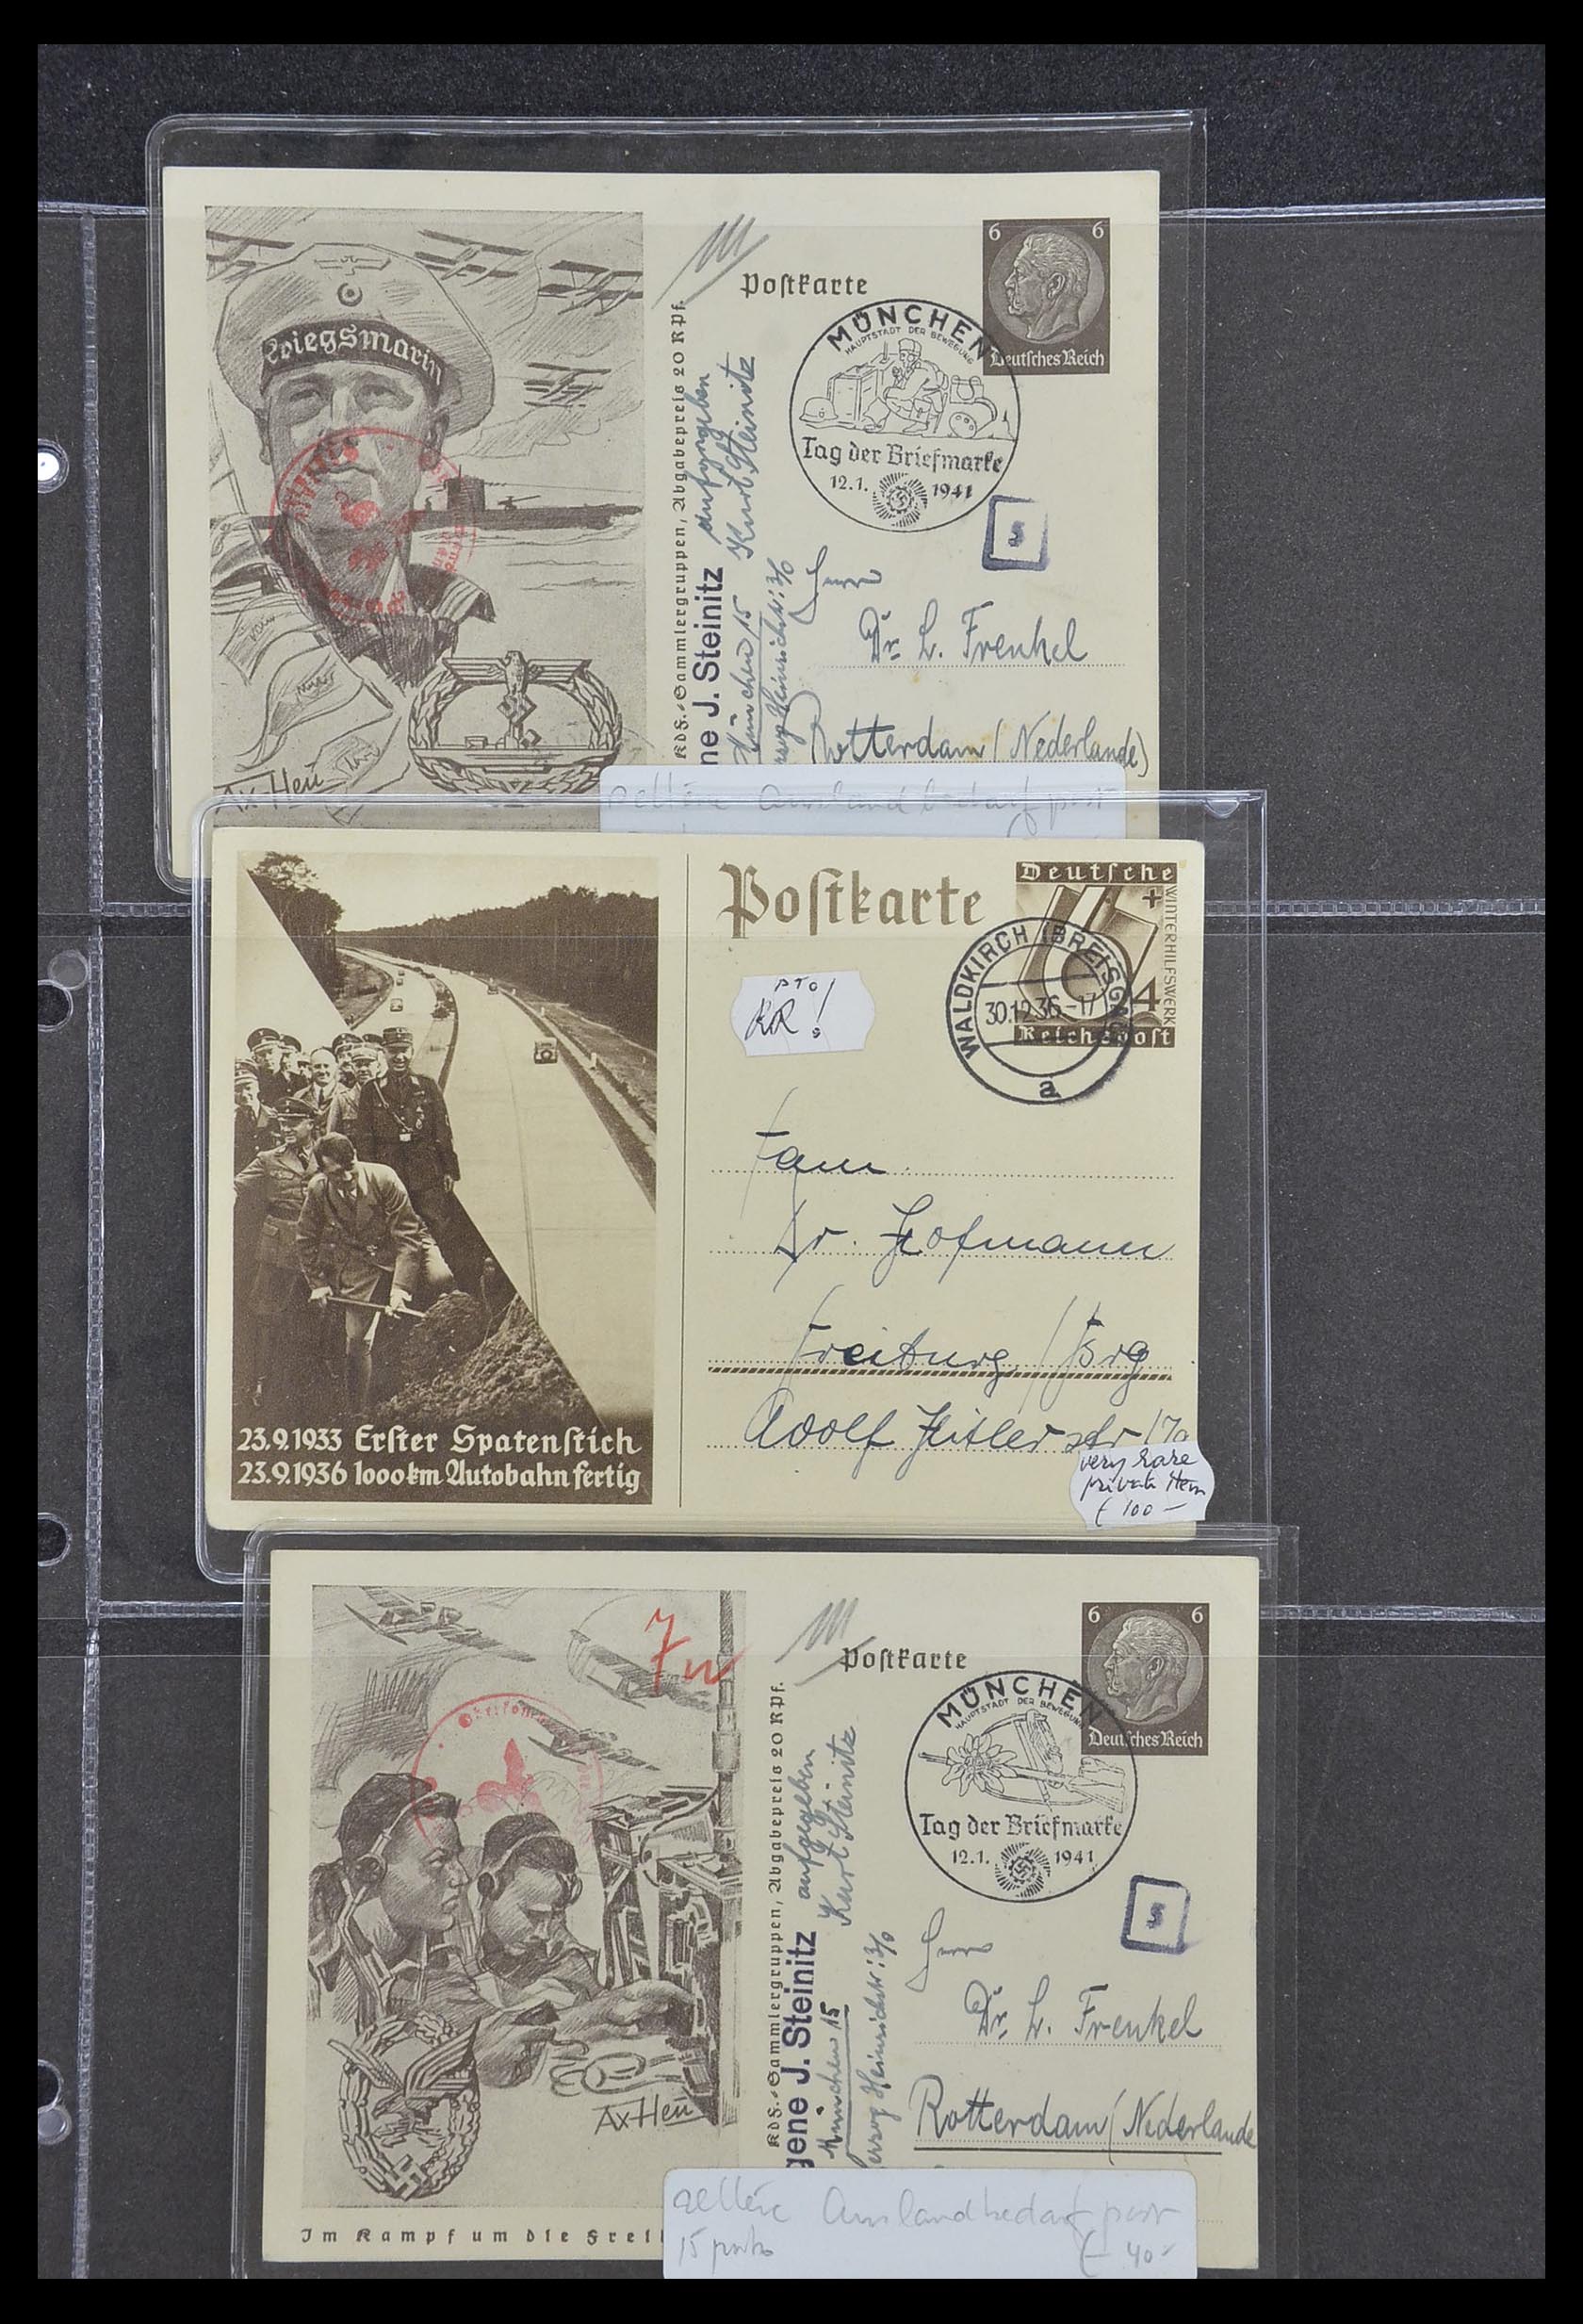 33995 033 - Stamp collection 33995 Germany propaganda cards.